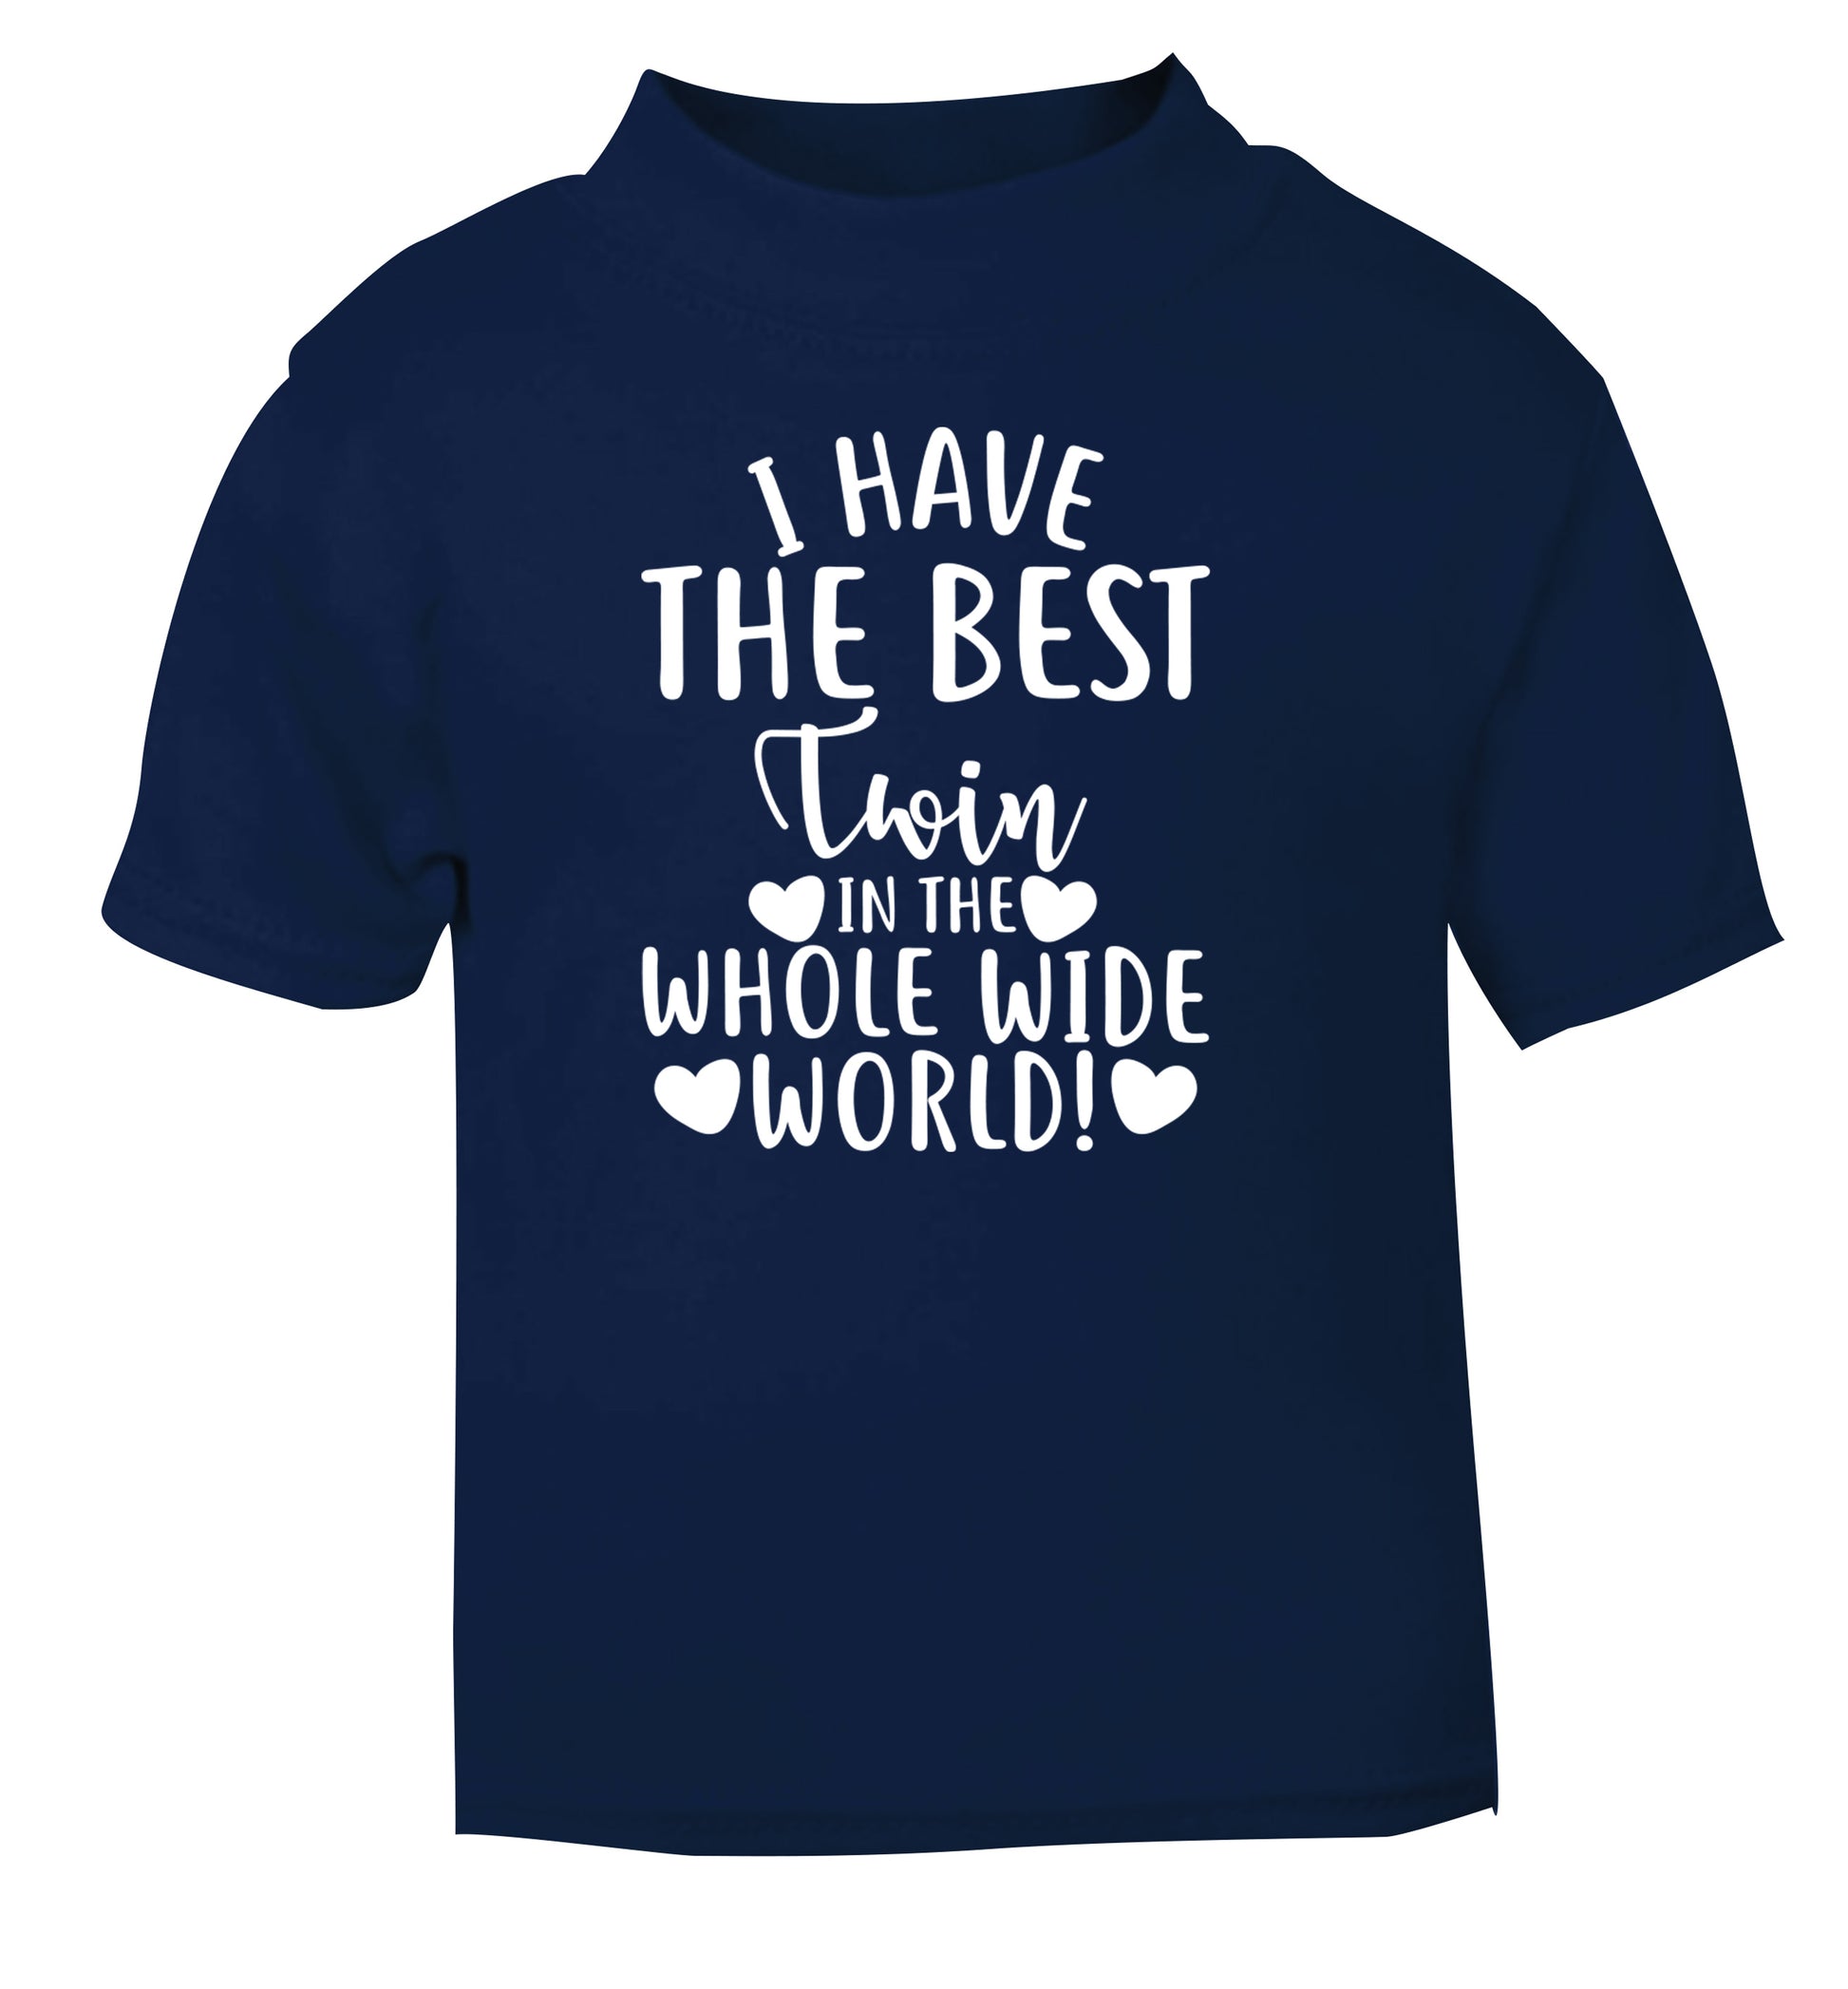 I have the best twin in the whole wide world! navy Baby Toddler Tshirt 2 Years